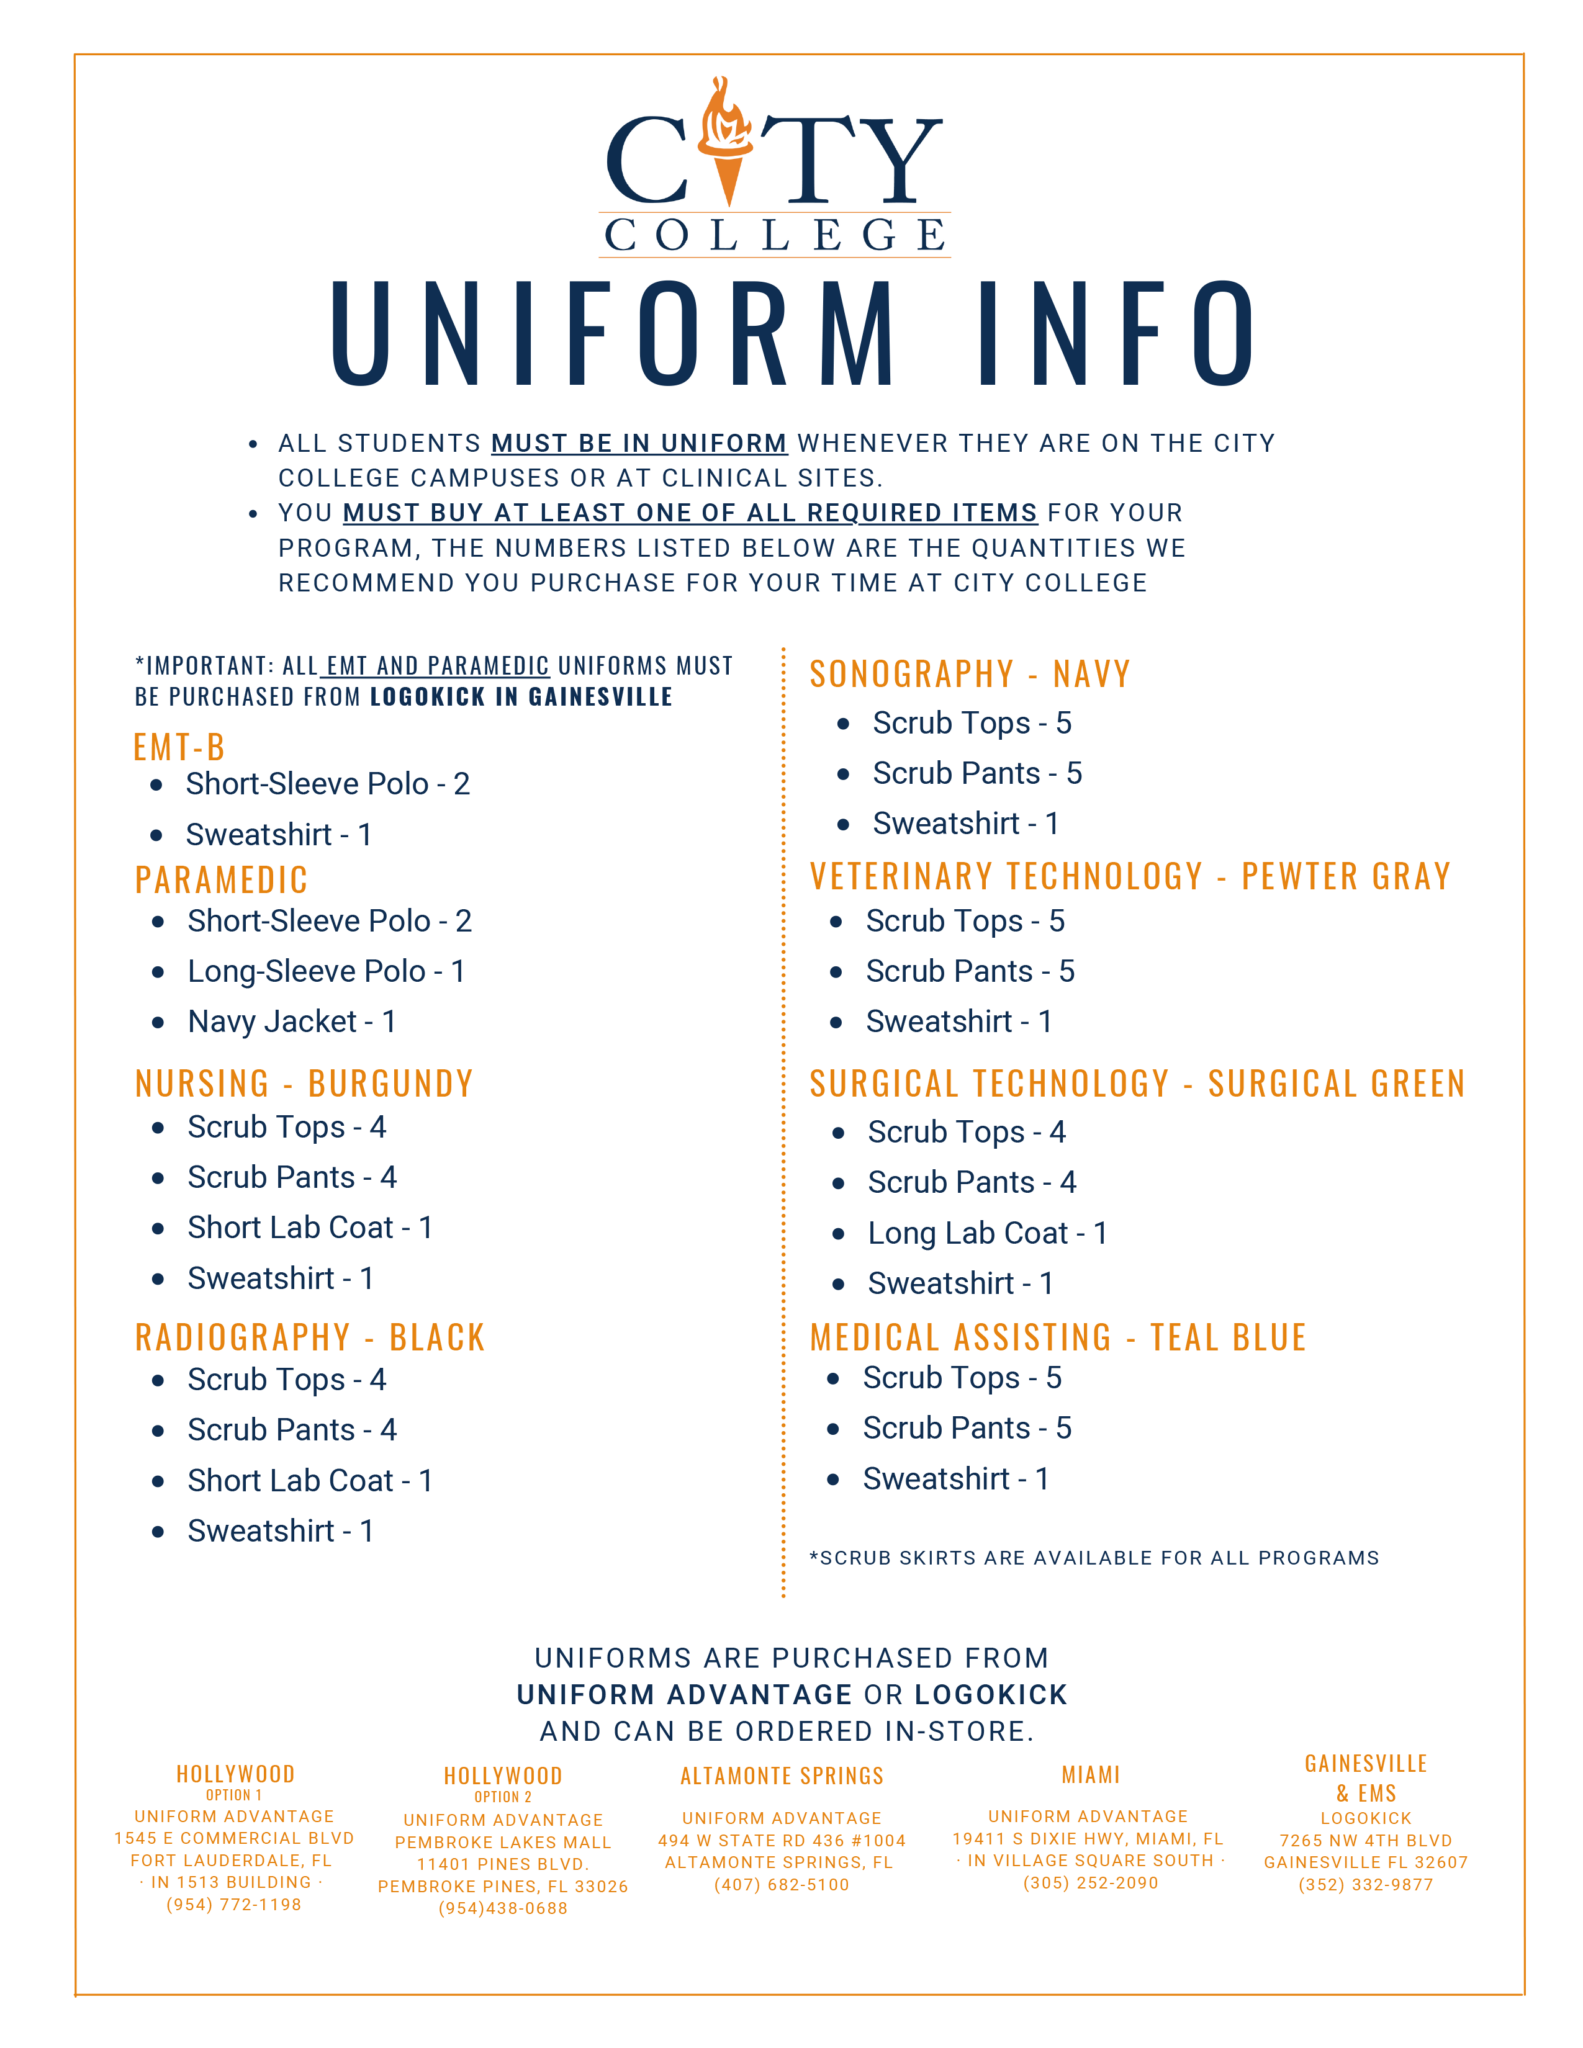 City College uniform specifications based on enrolled program.